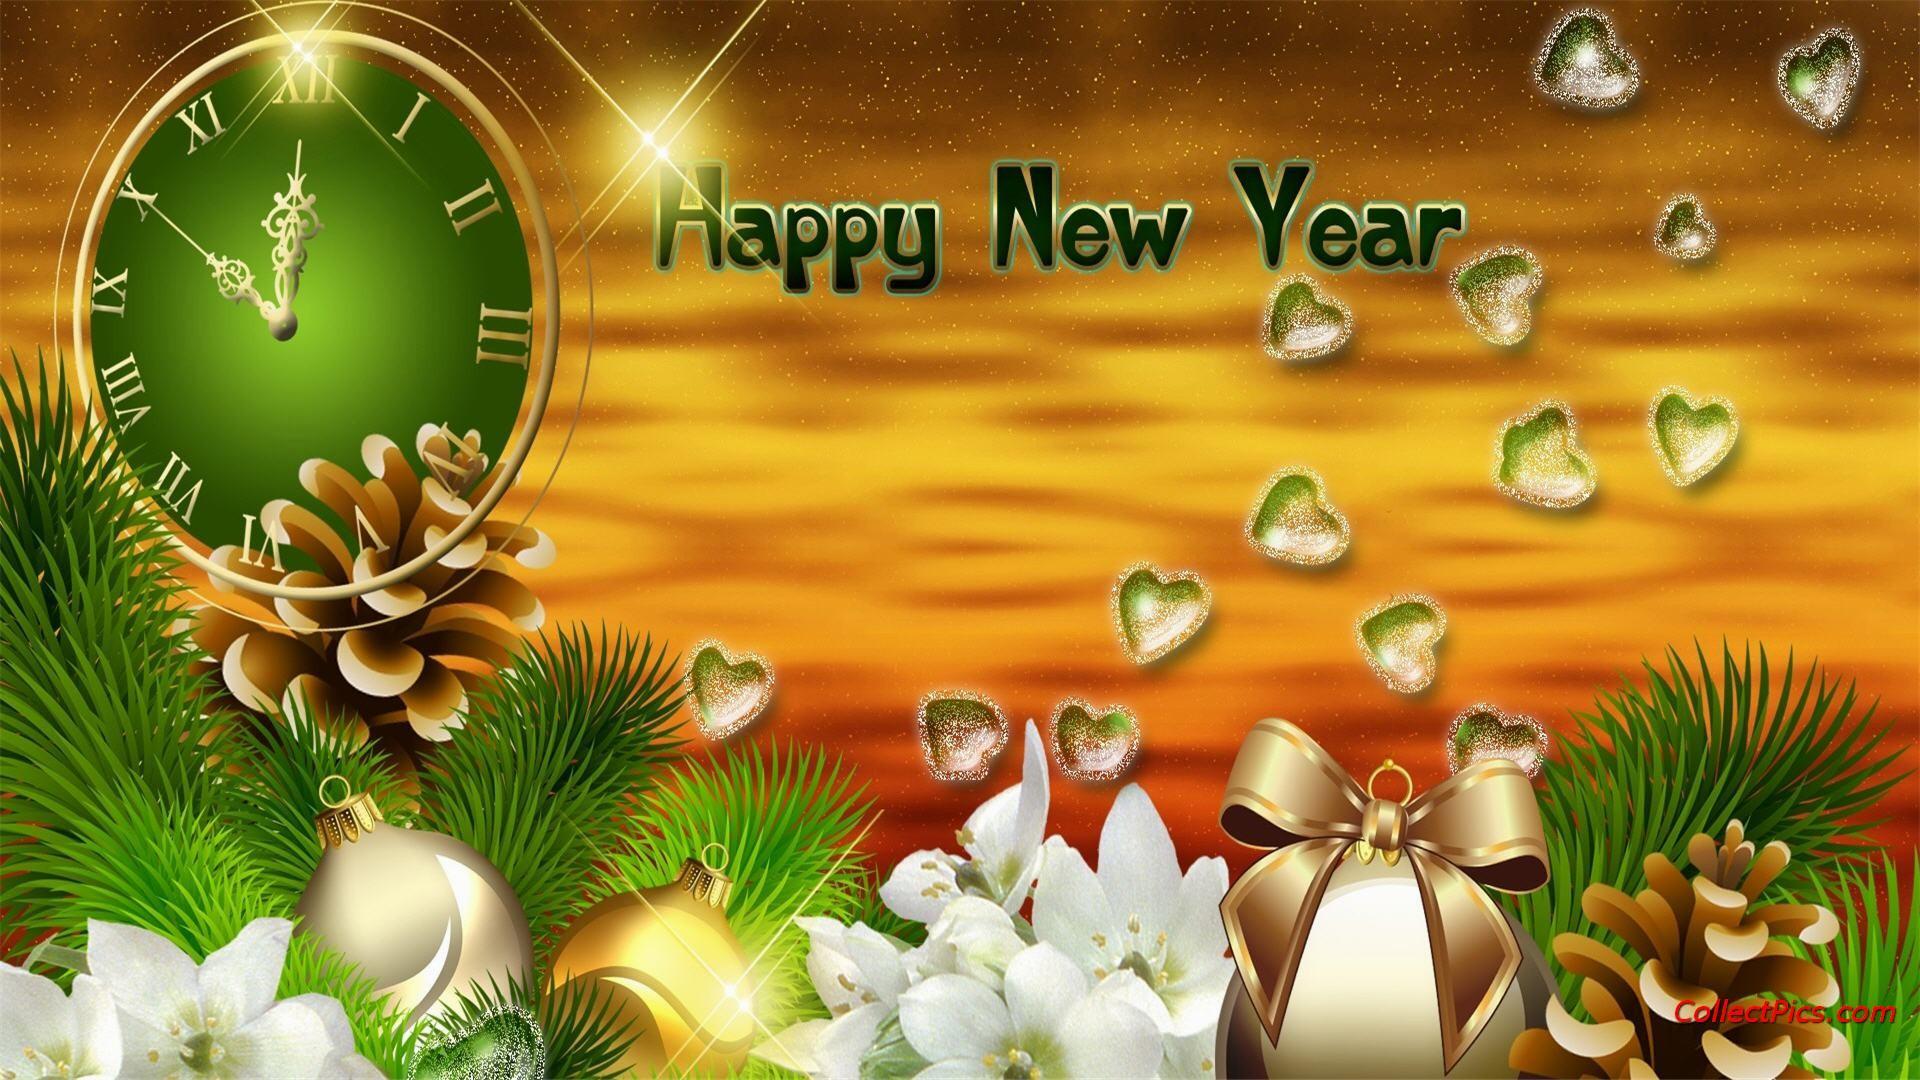 Beautiful HD Wallpaper For Happy New Year 2020 Free Download